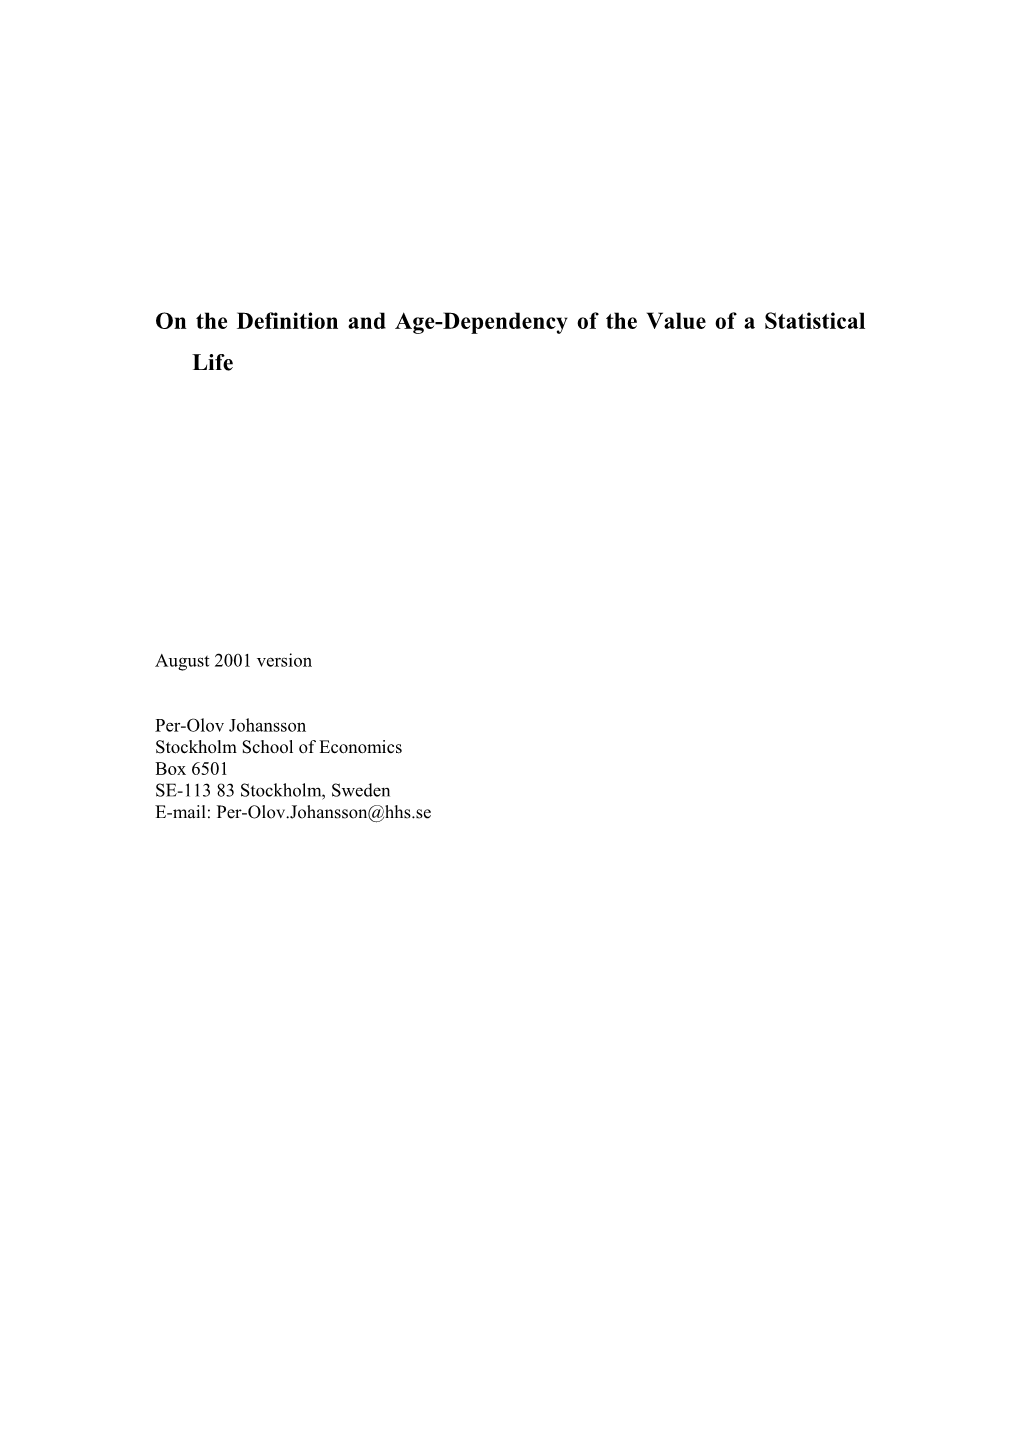 On the Definition and Age-Dependency of the Value of a Statistical Life